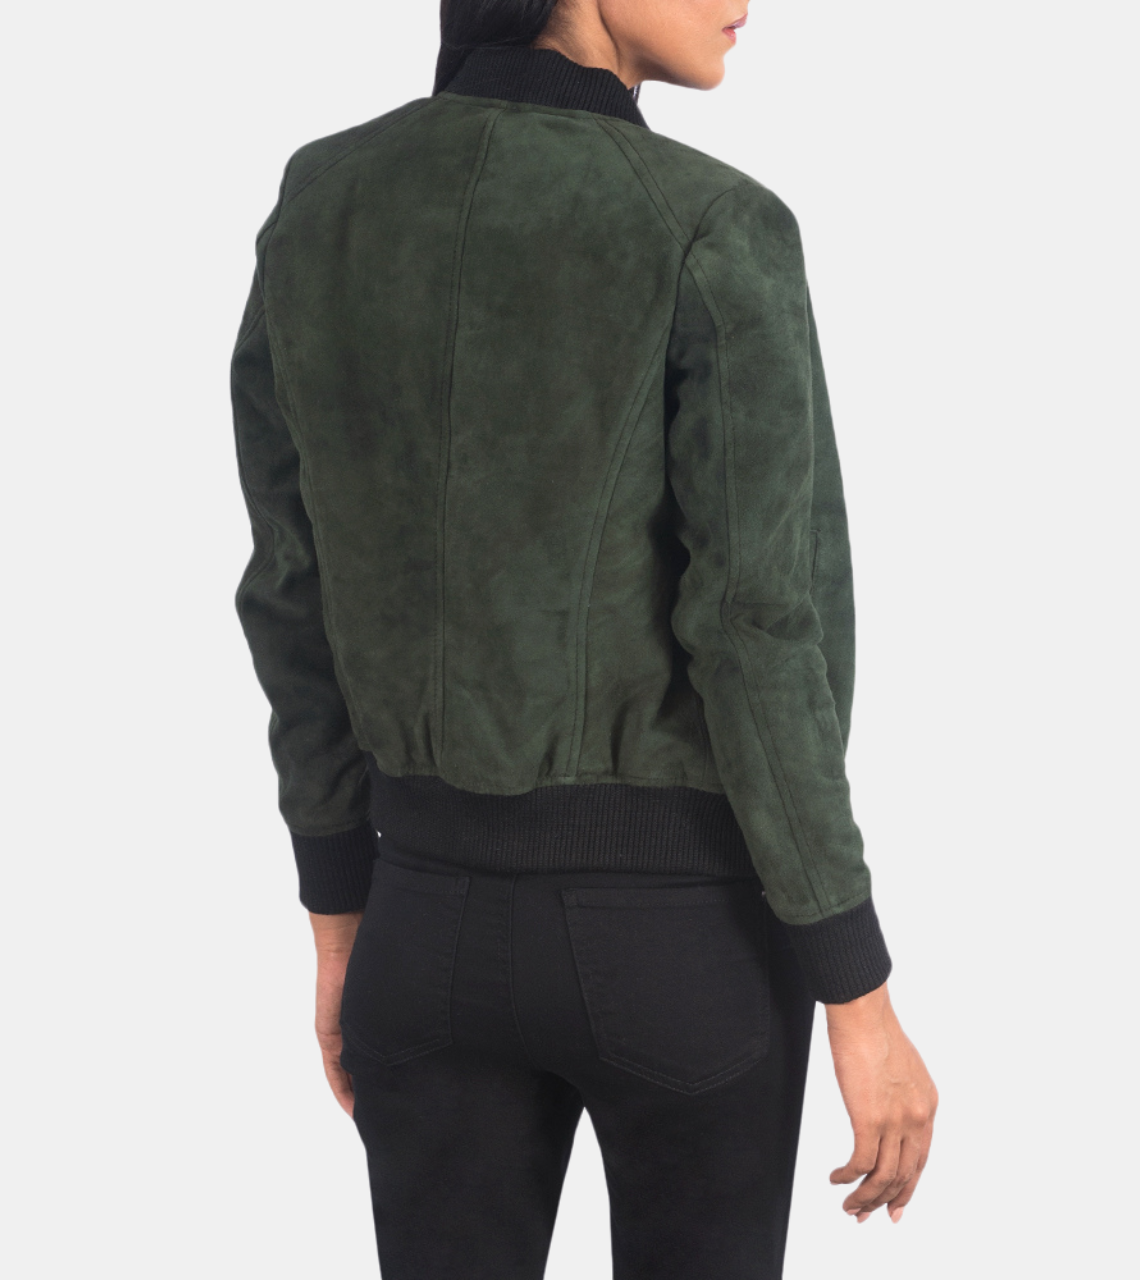  Mint Suede Bomber Leather Jacket 